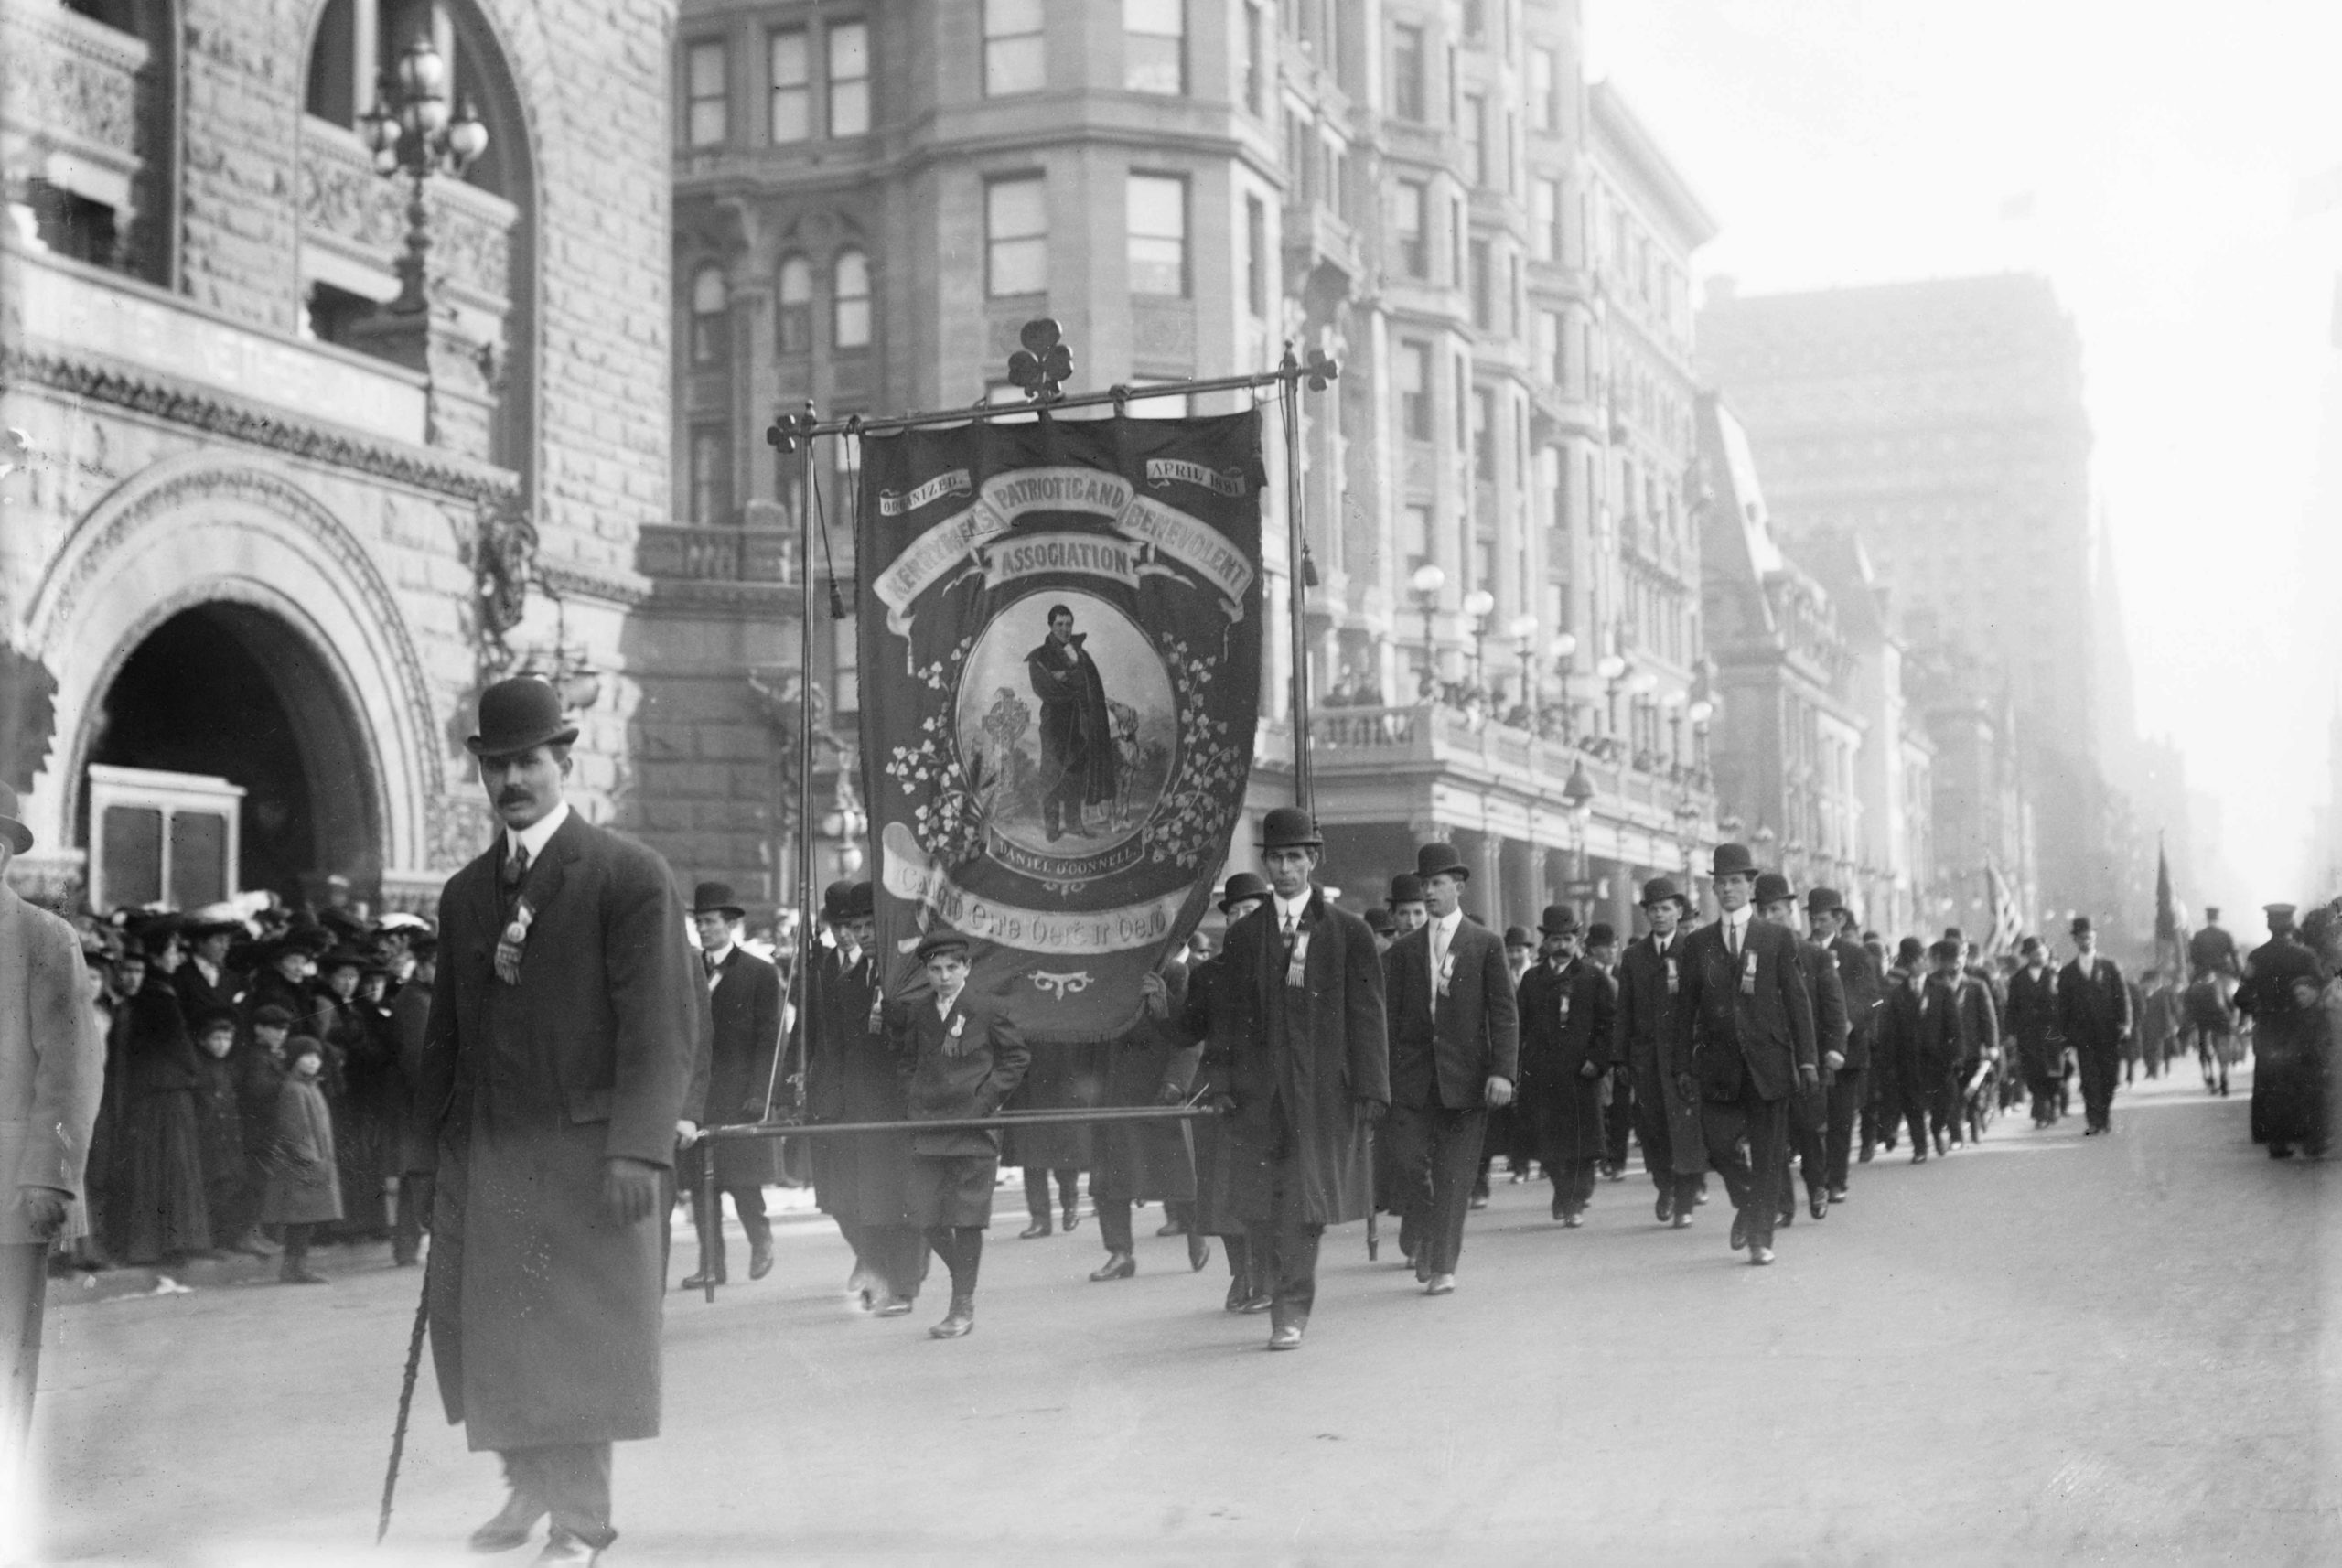 St. Patrick's Day Parade on Fifth Avenue, New York City in 1907